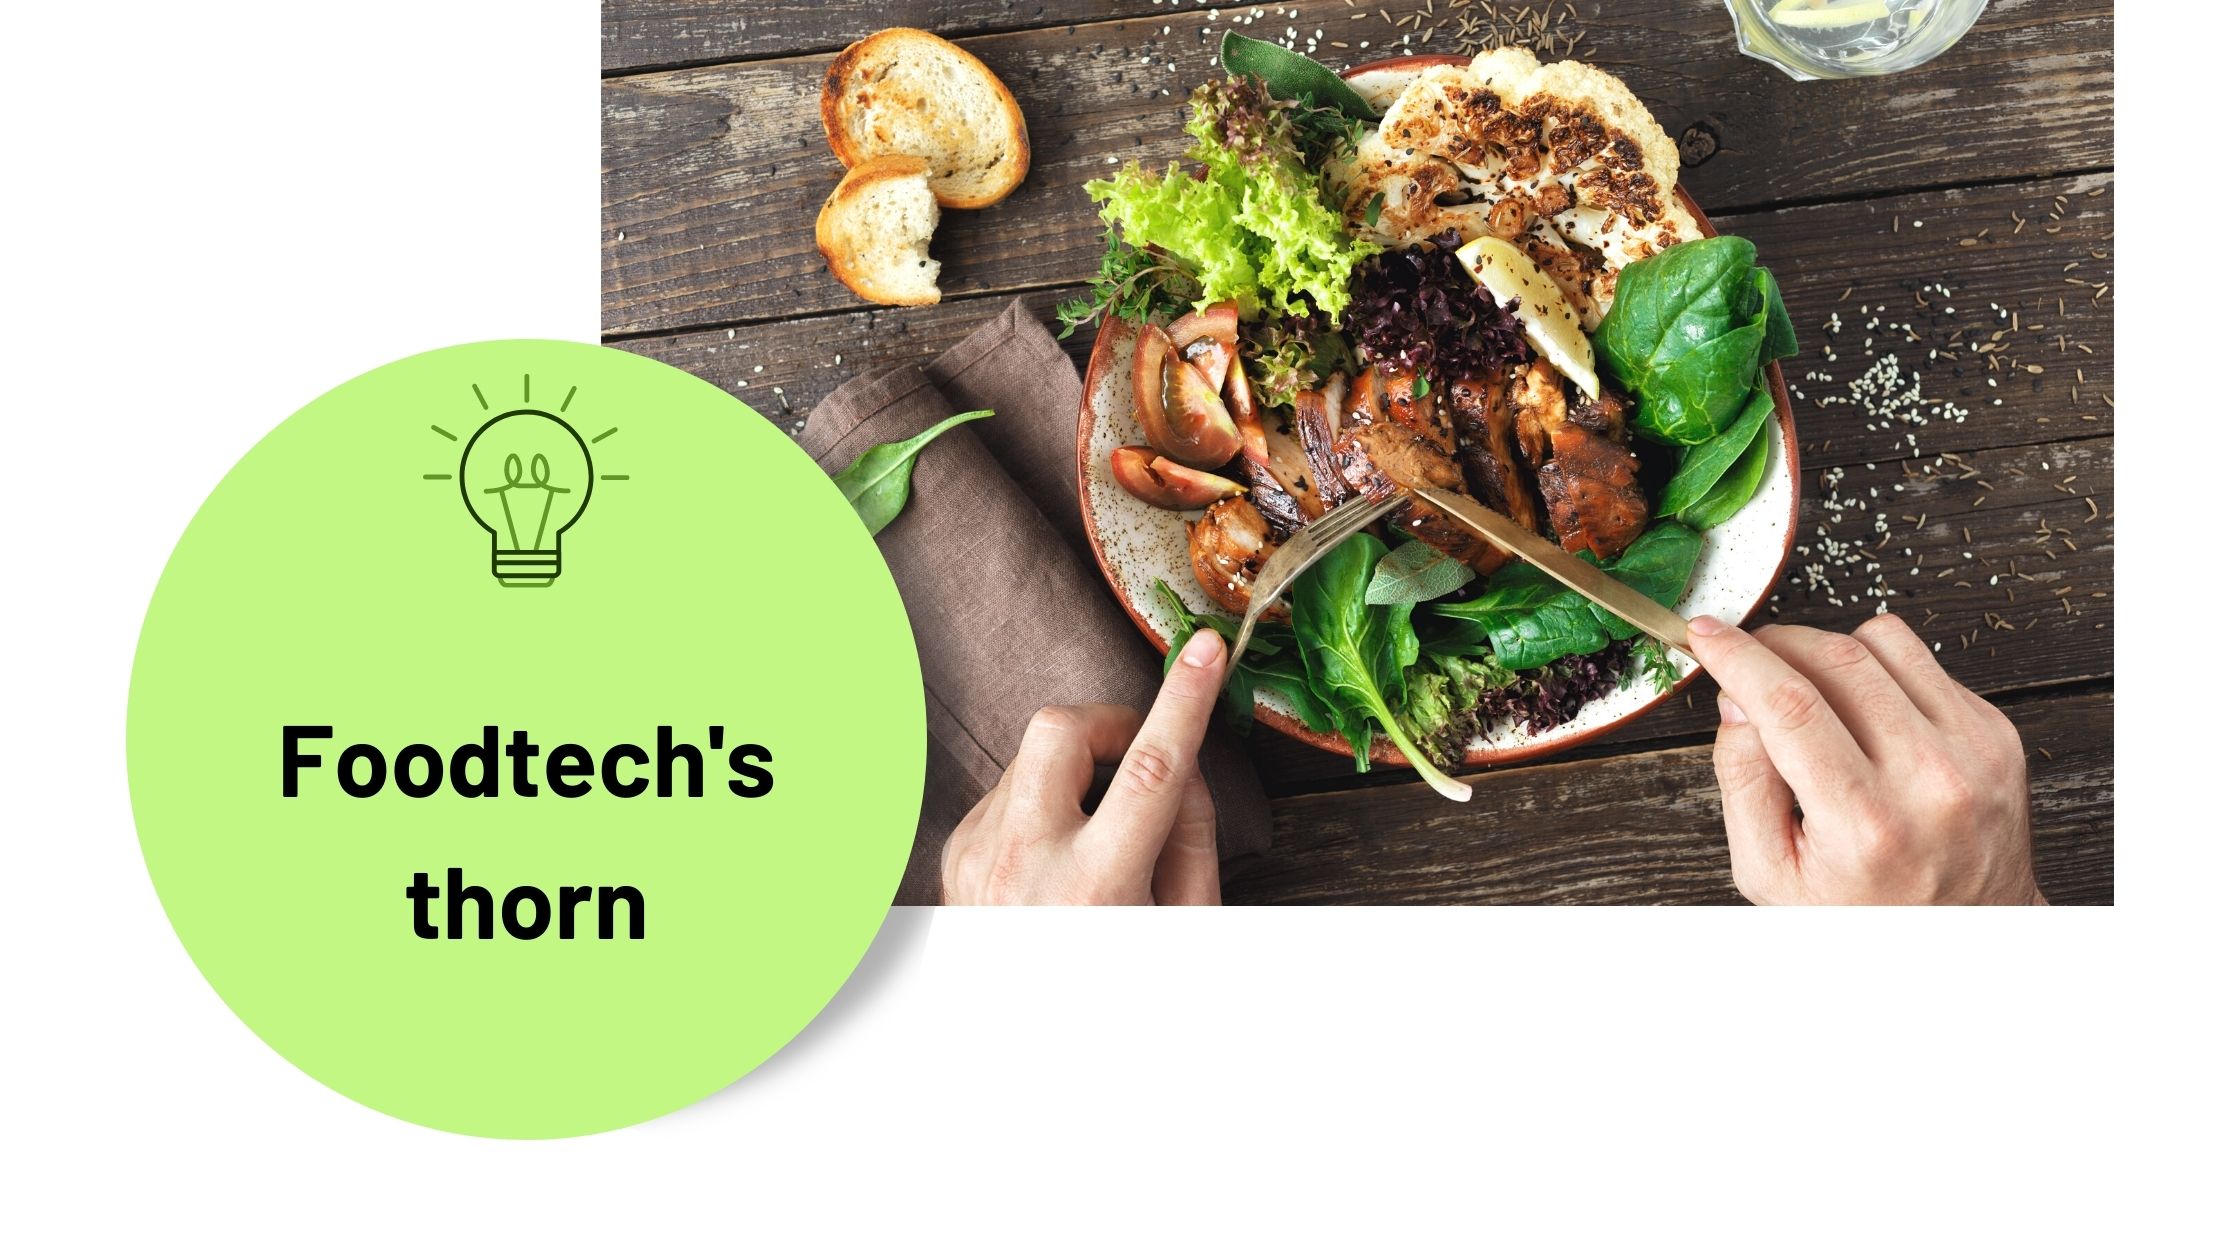 Foodtech's thorn